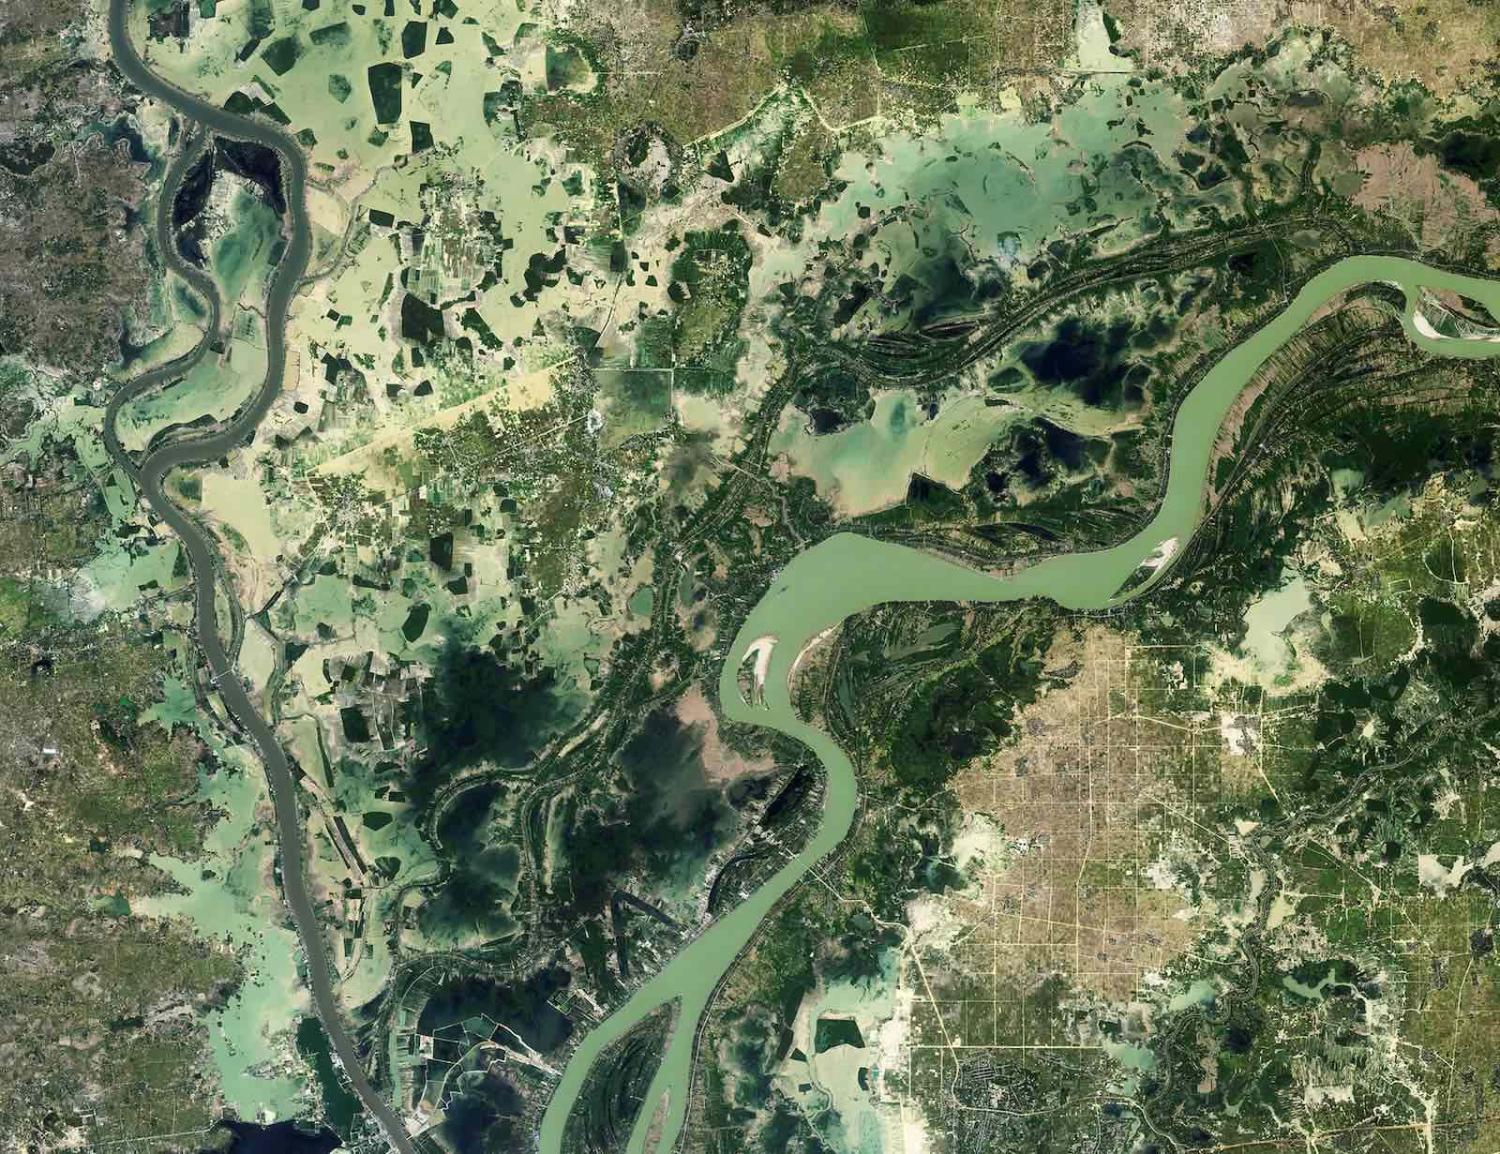 A section of the Mekong Delta (Photo: European Space Agency/Flickr)